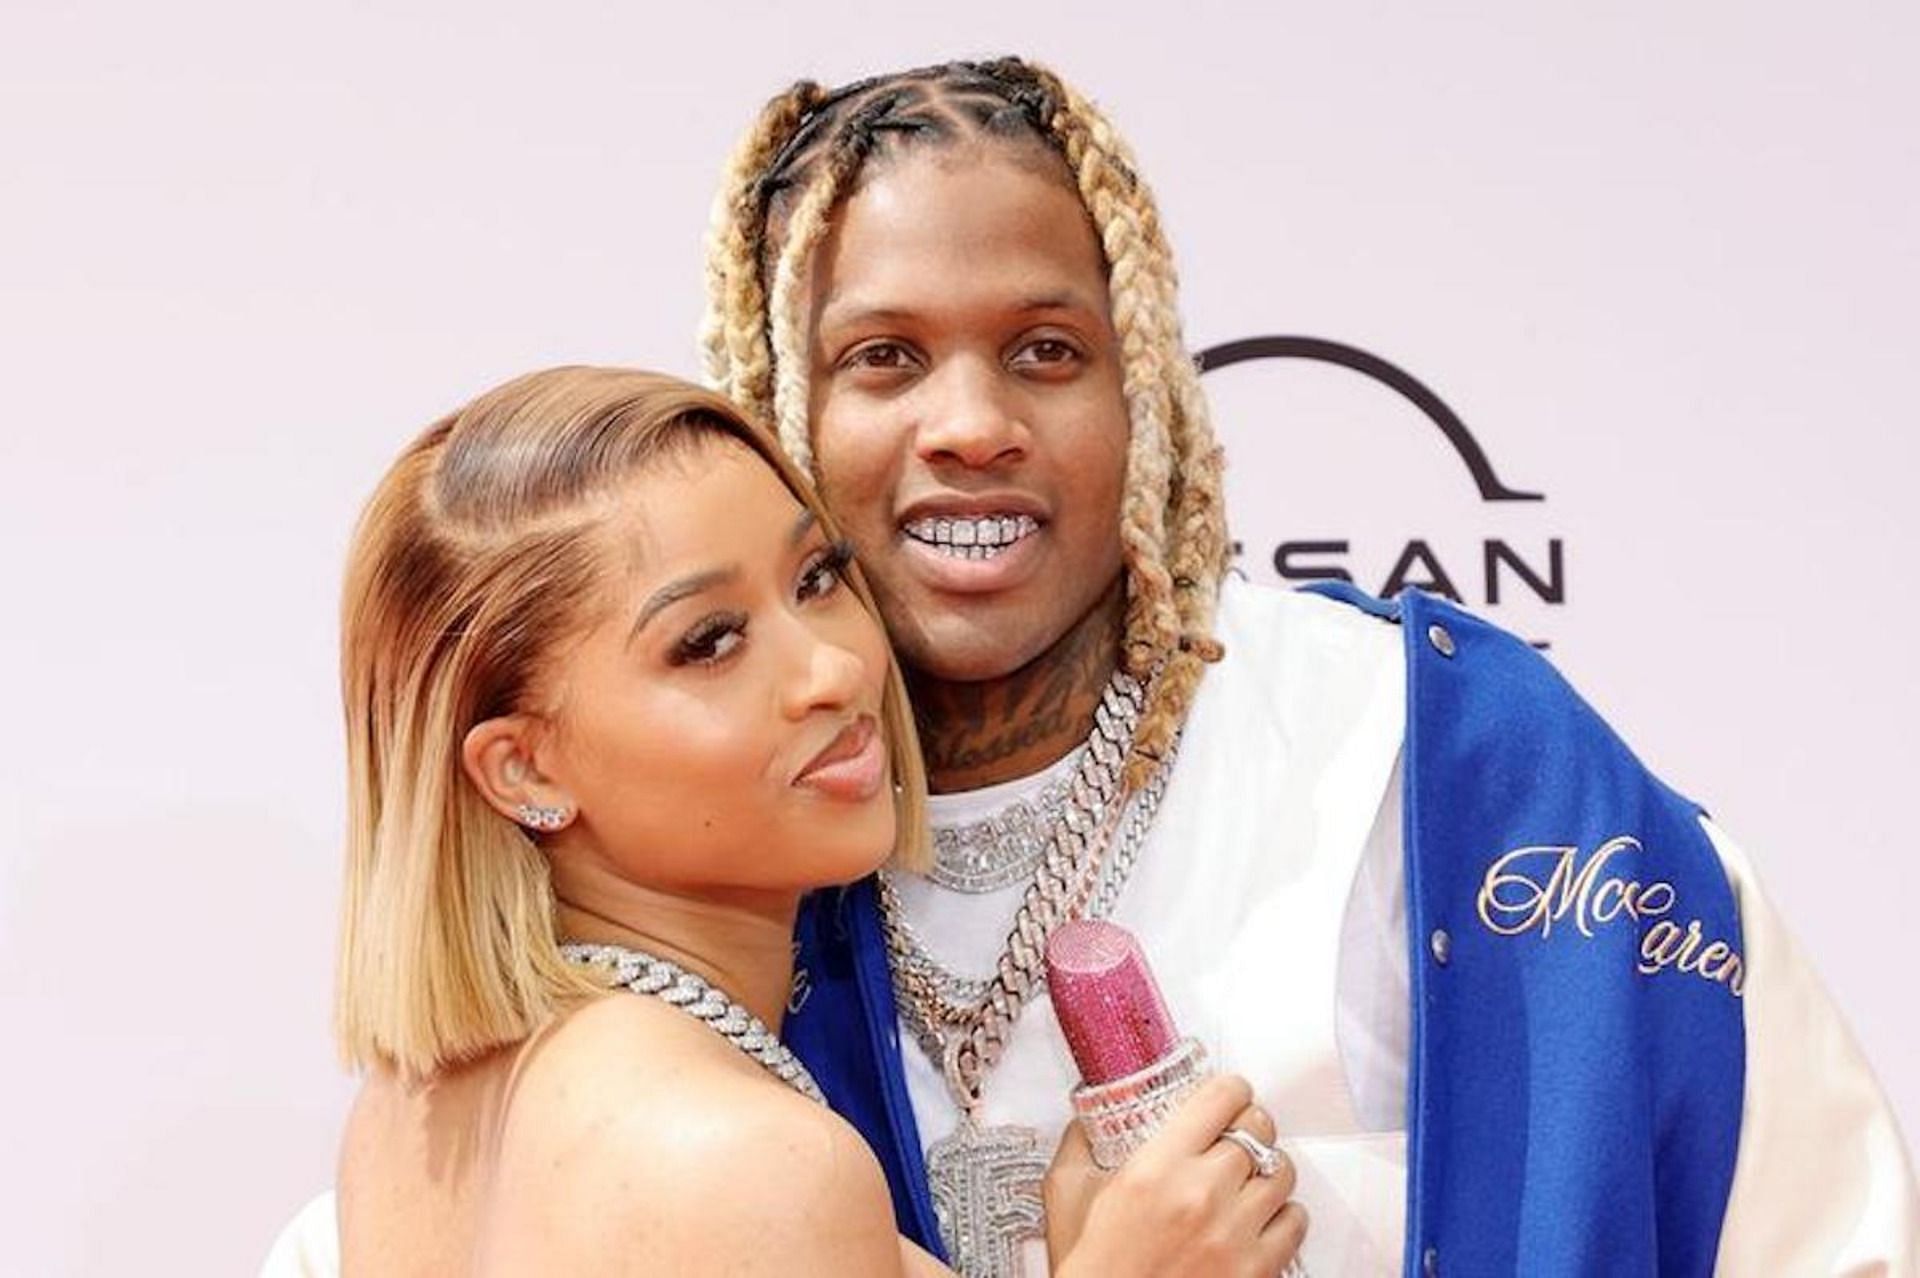 Speculation of Lil Durk and India Royale breaking up has emerged online. 